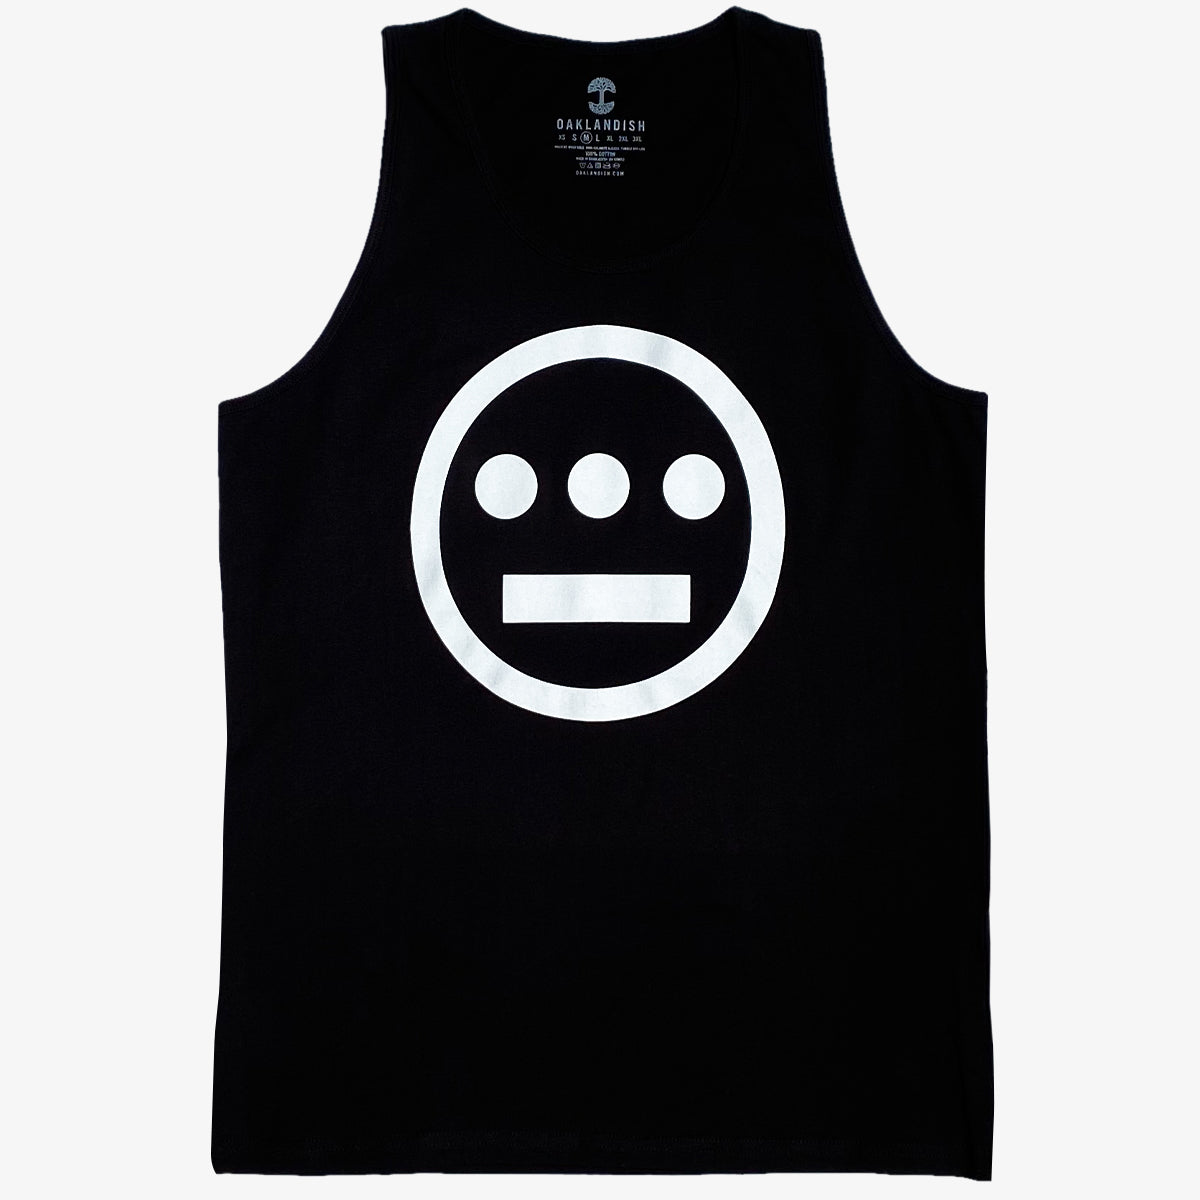 Black tank top with white Hieroglyphics hip hop logo on the chest.